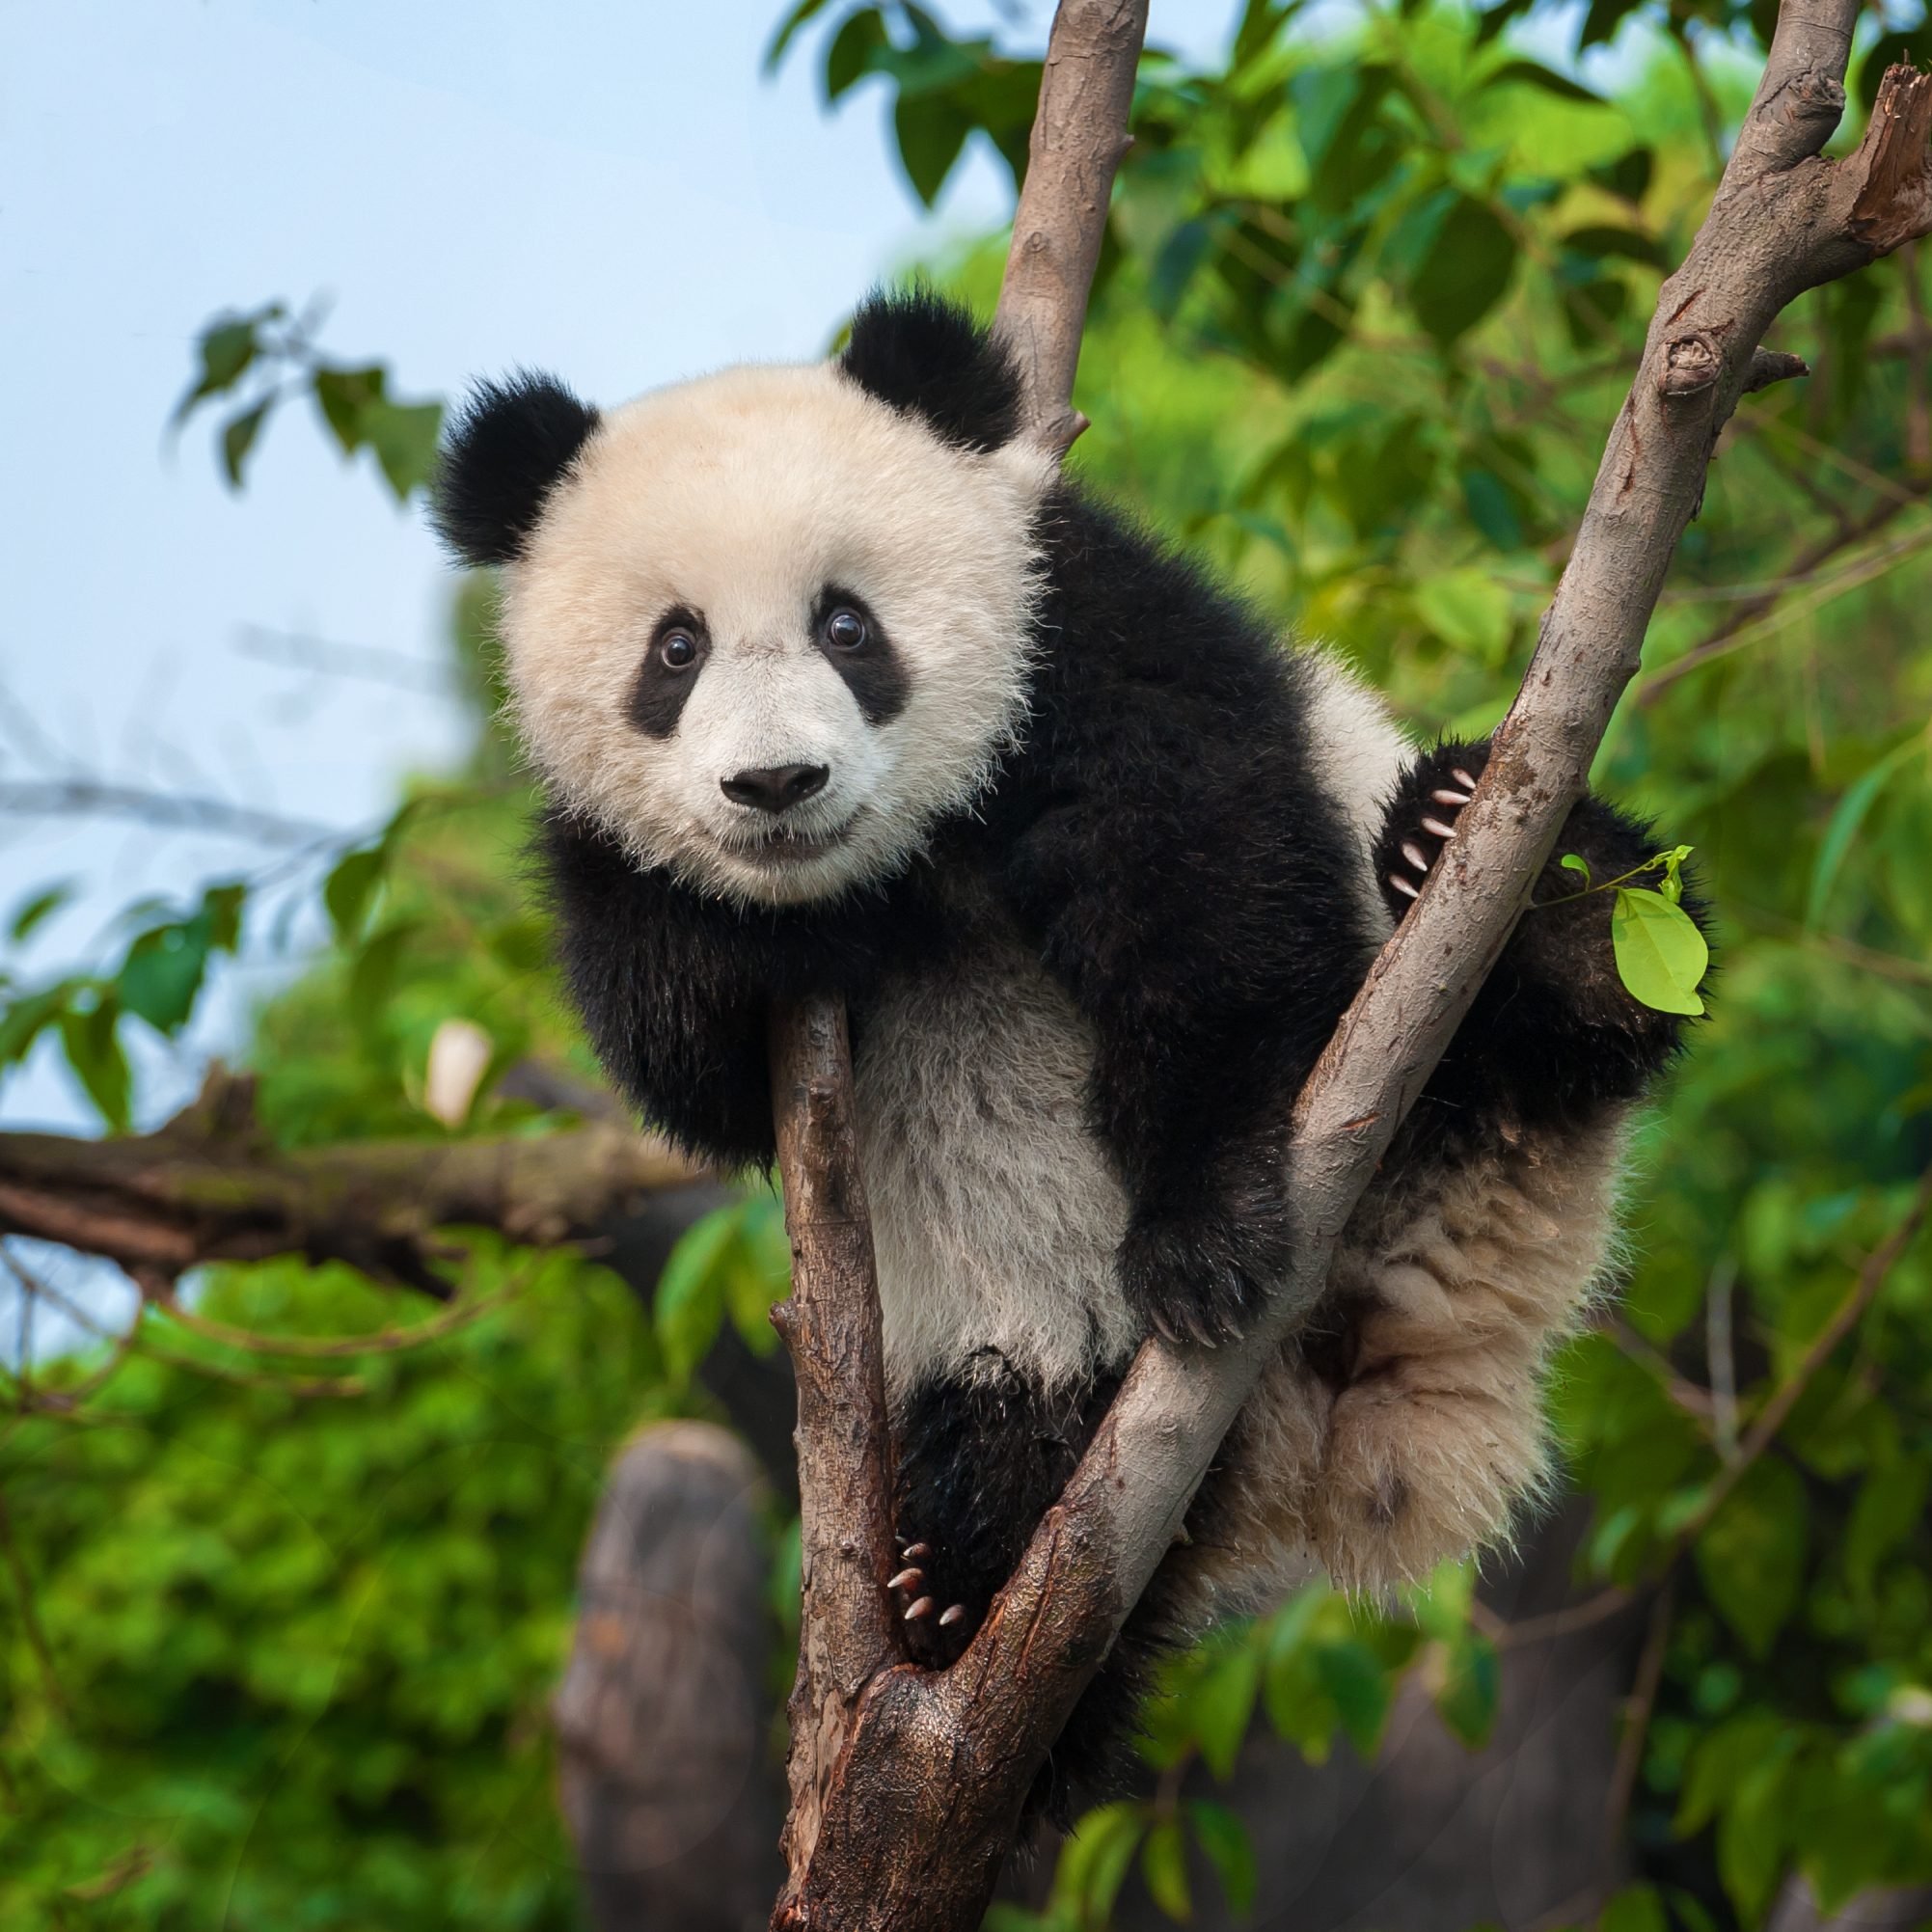 How many wild pandas are there in the world?